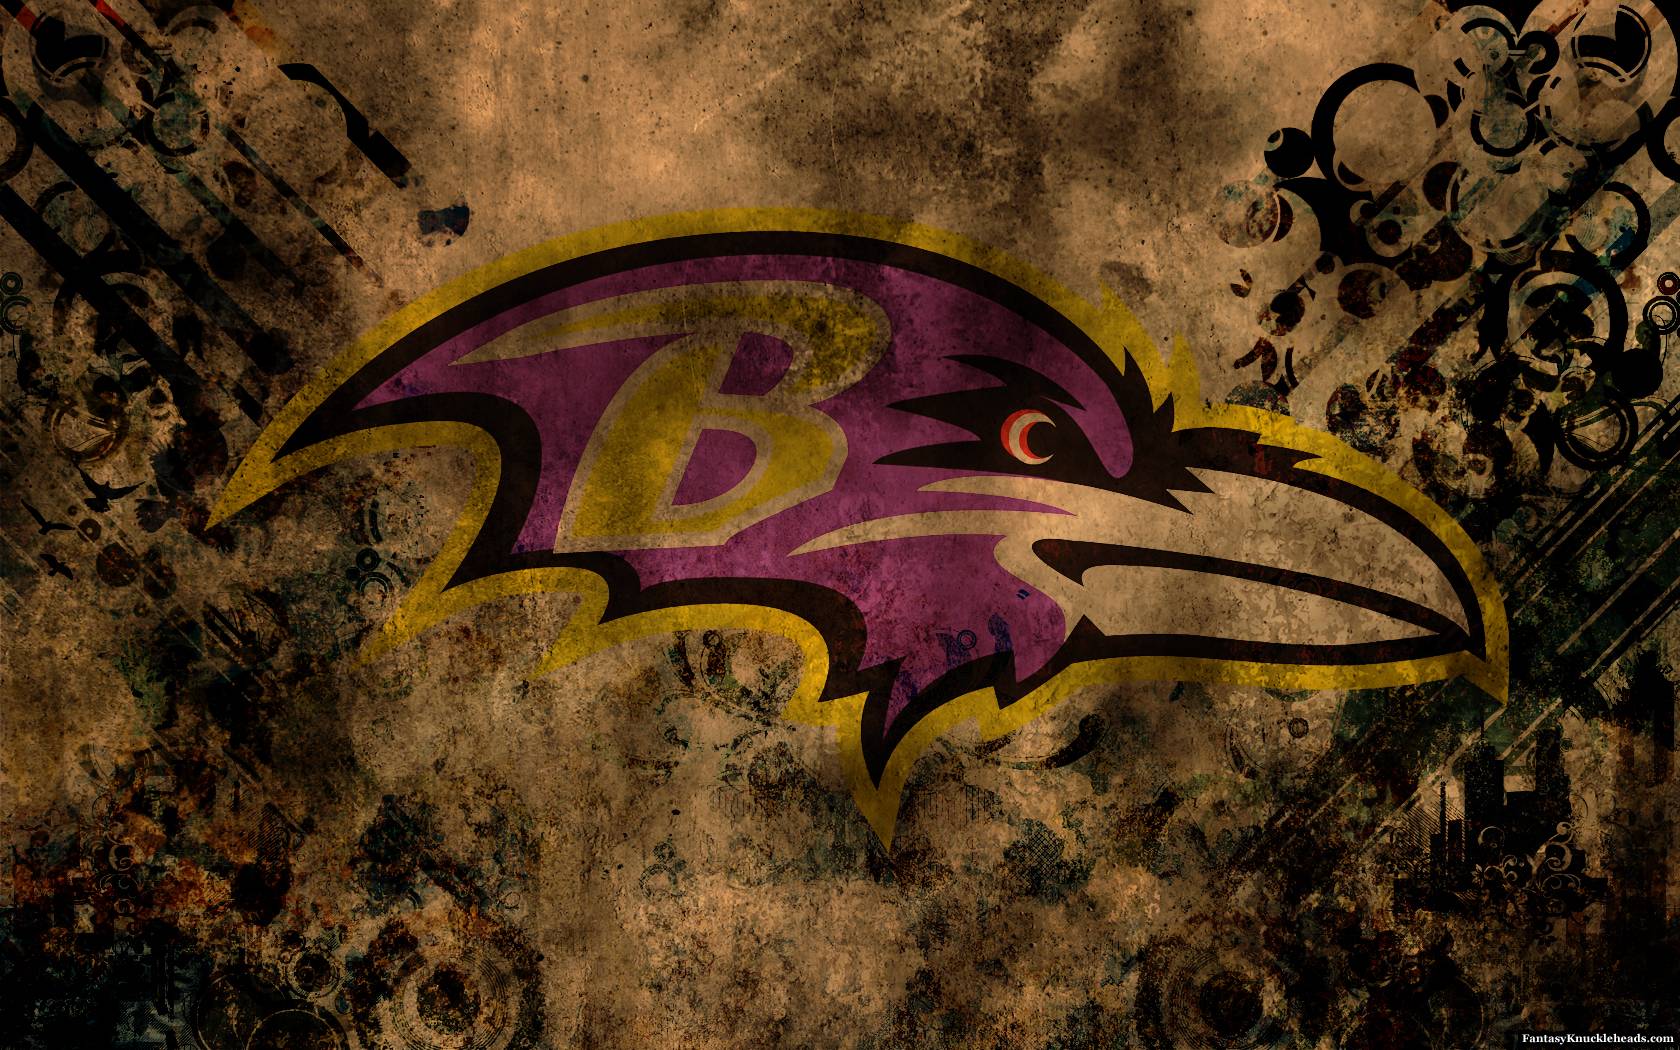 HD nfl baltimore ravens background wallpapers